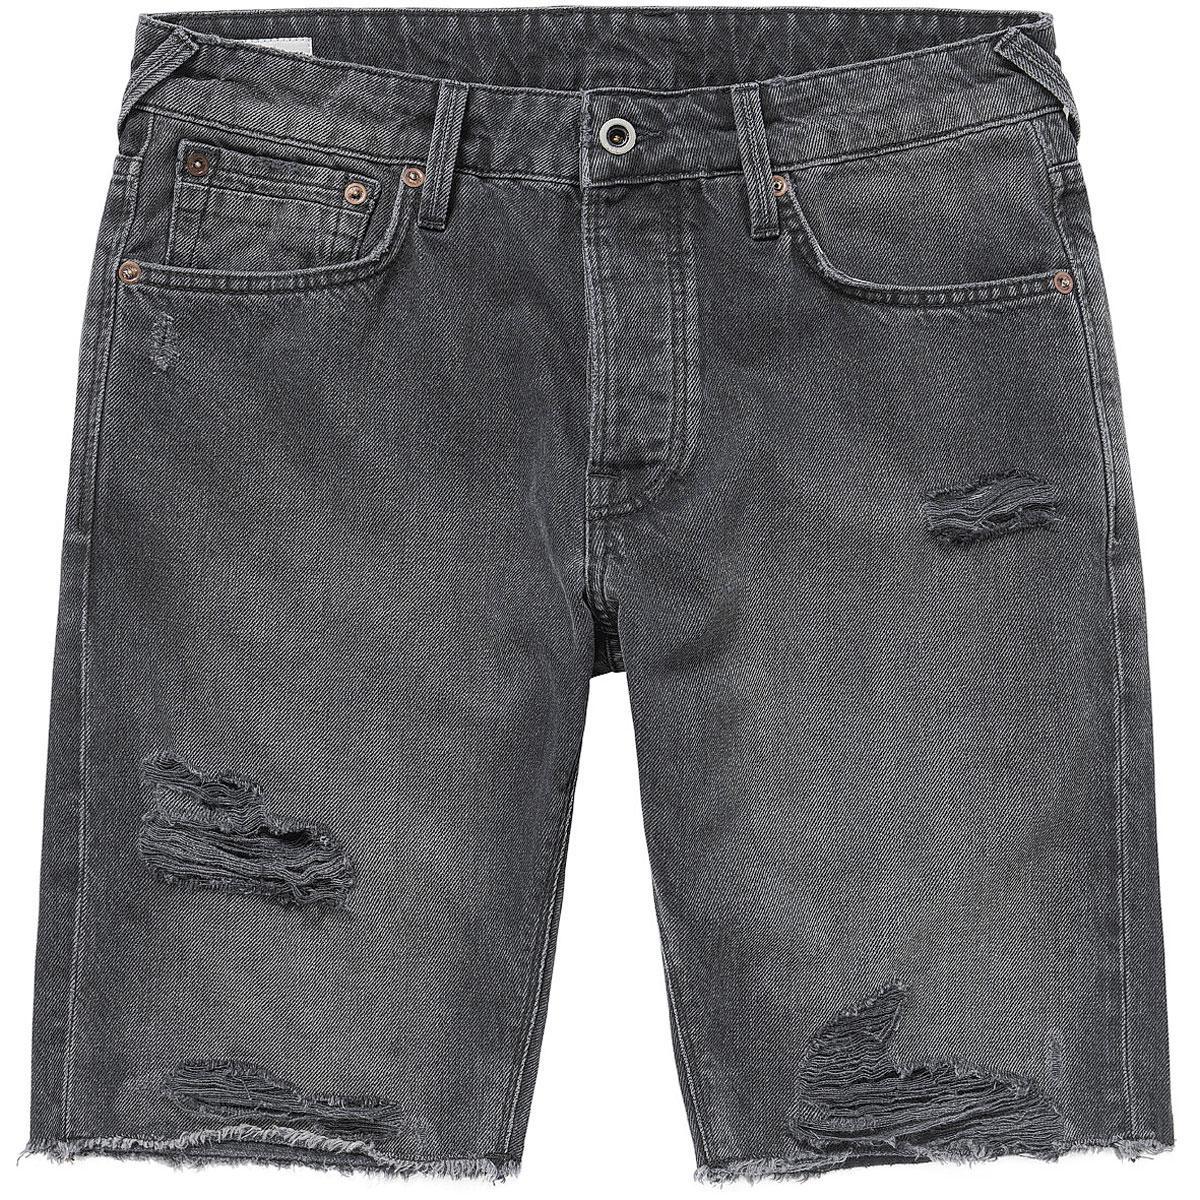 Jeansshort (89,95 euro), Pepe Jeans.